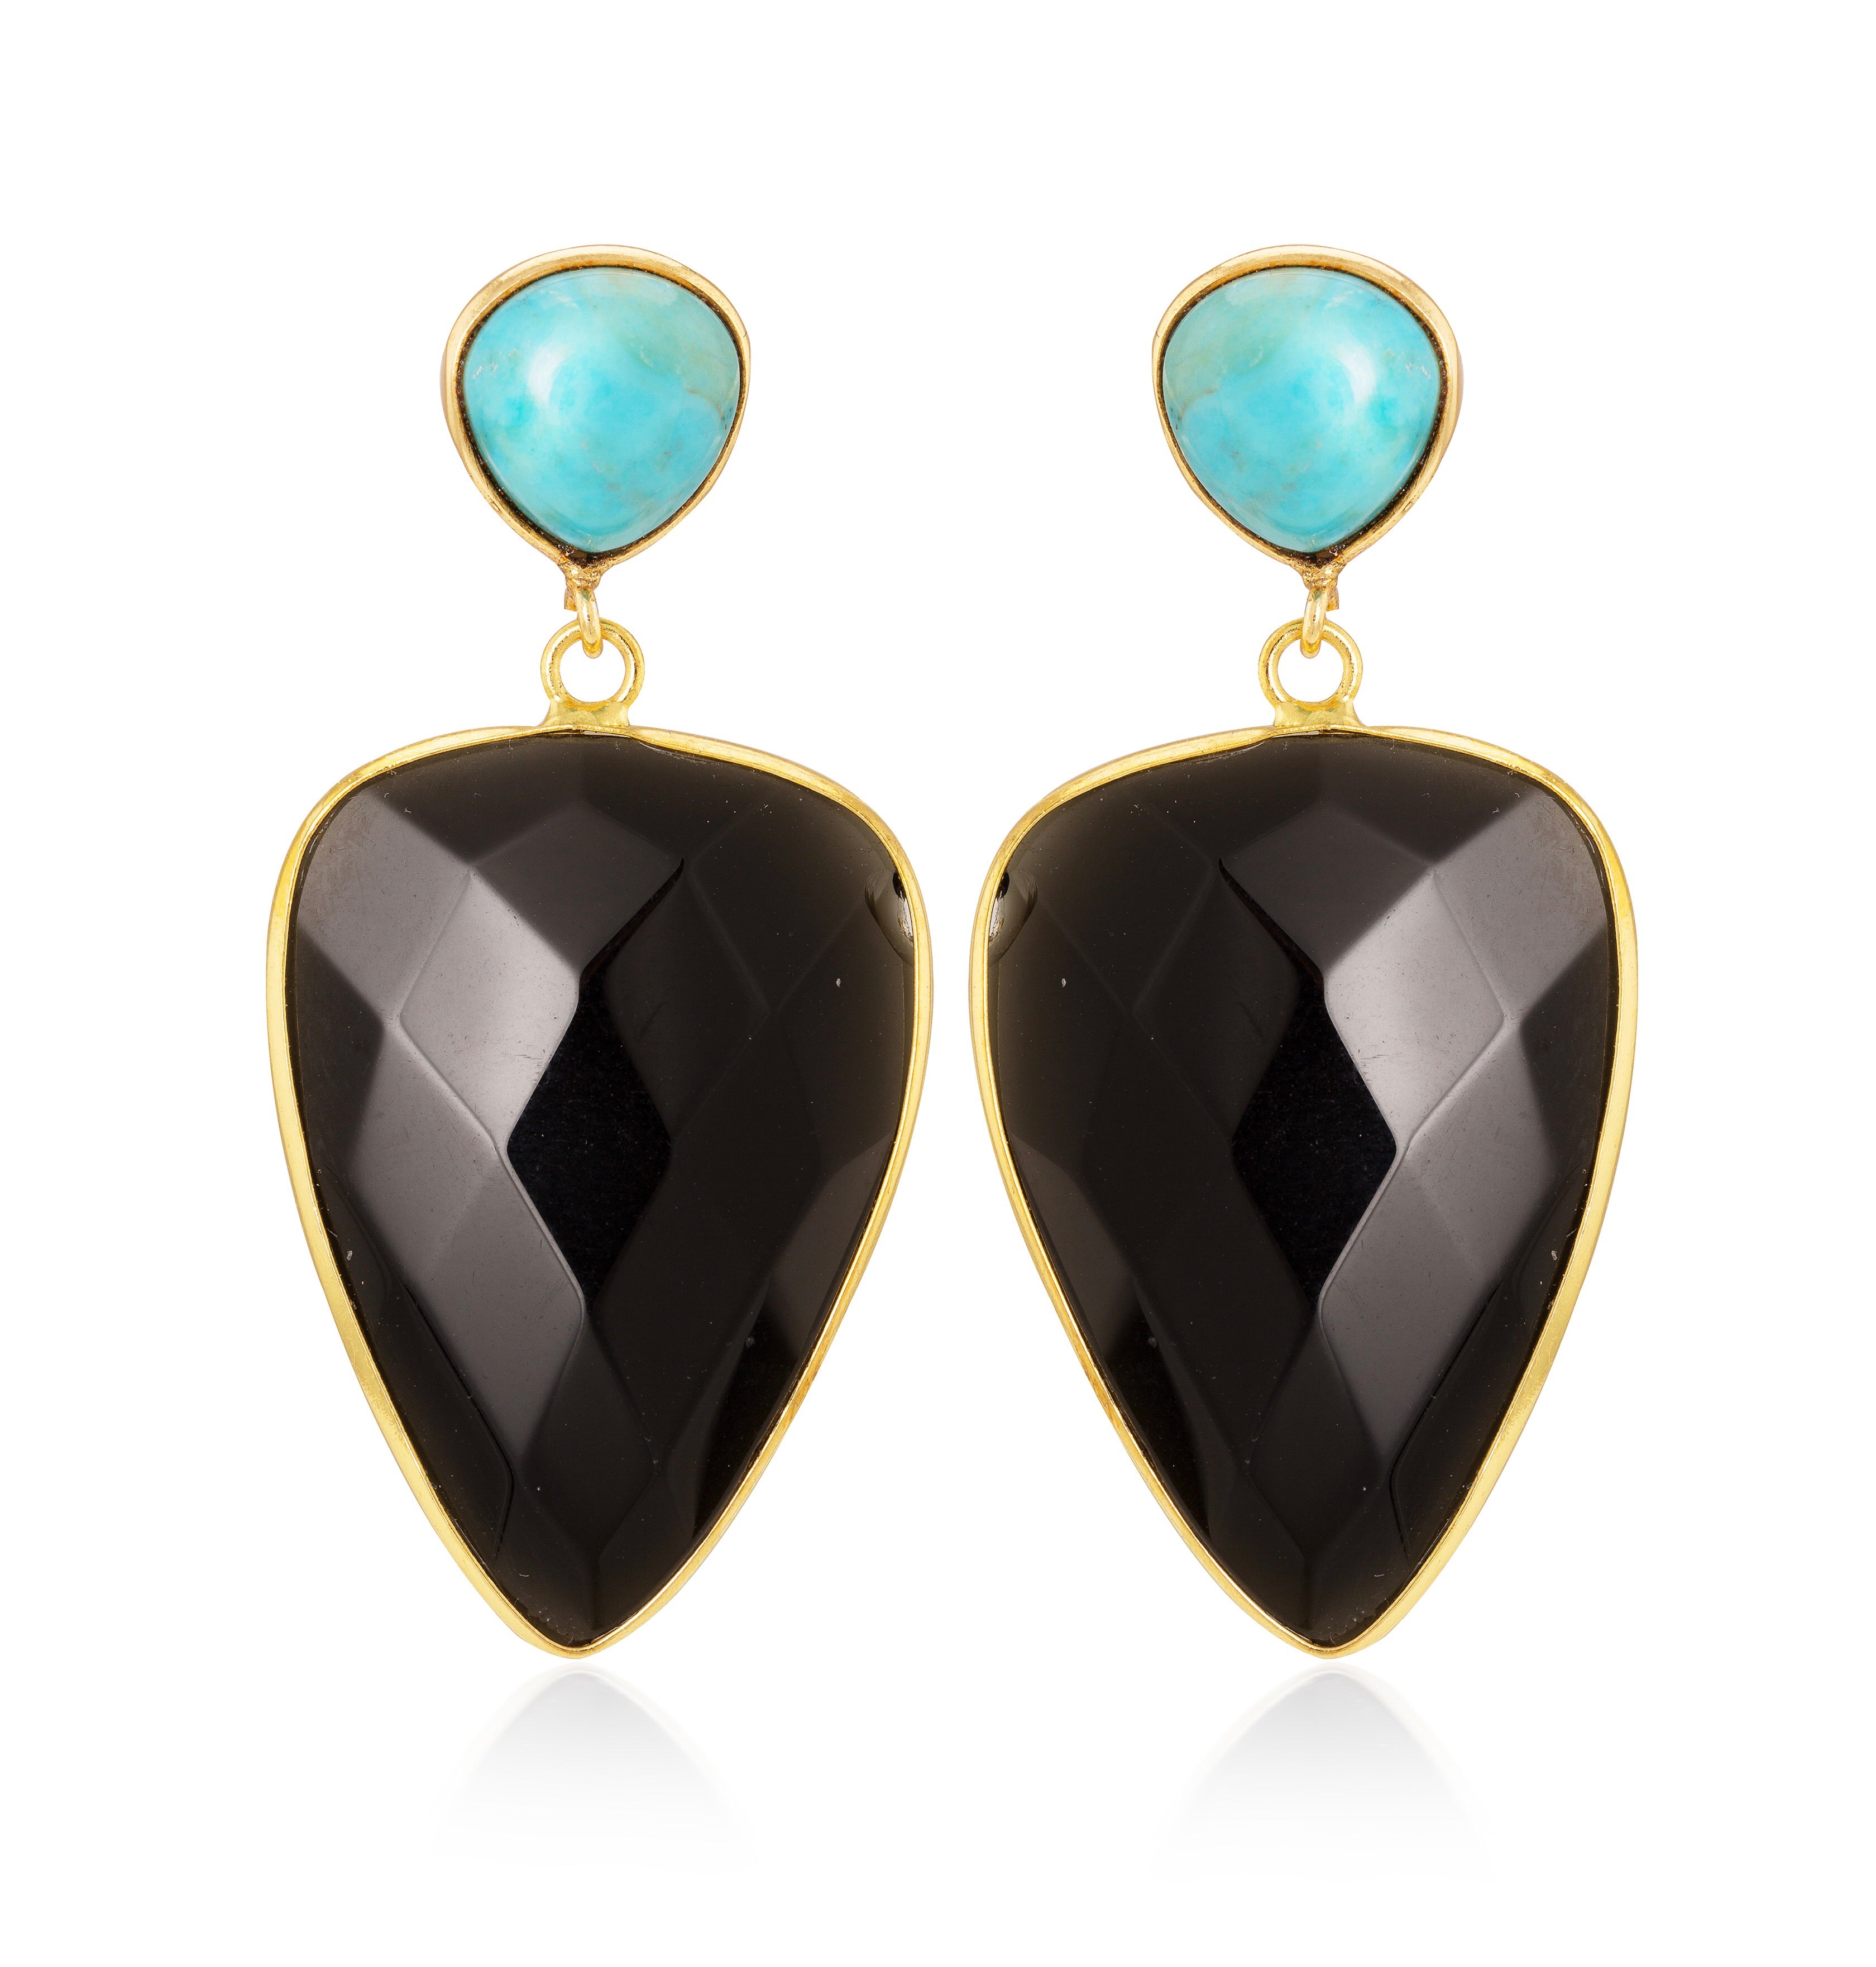 Aria-V Ani teardron shaped earrings hancrafyed with faceted black agate and heart shaped polished turquoise studs